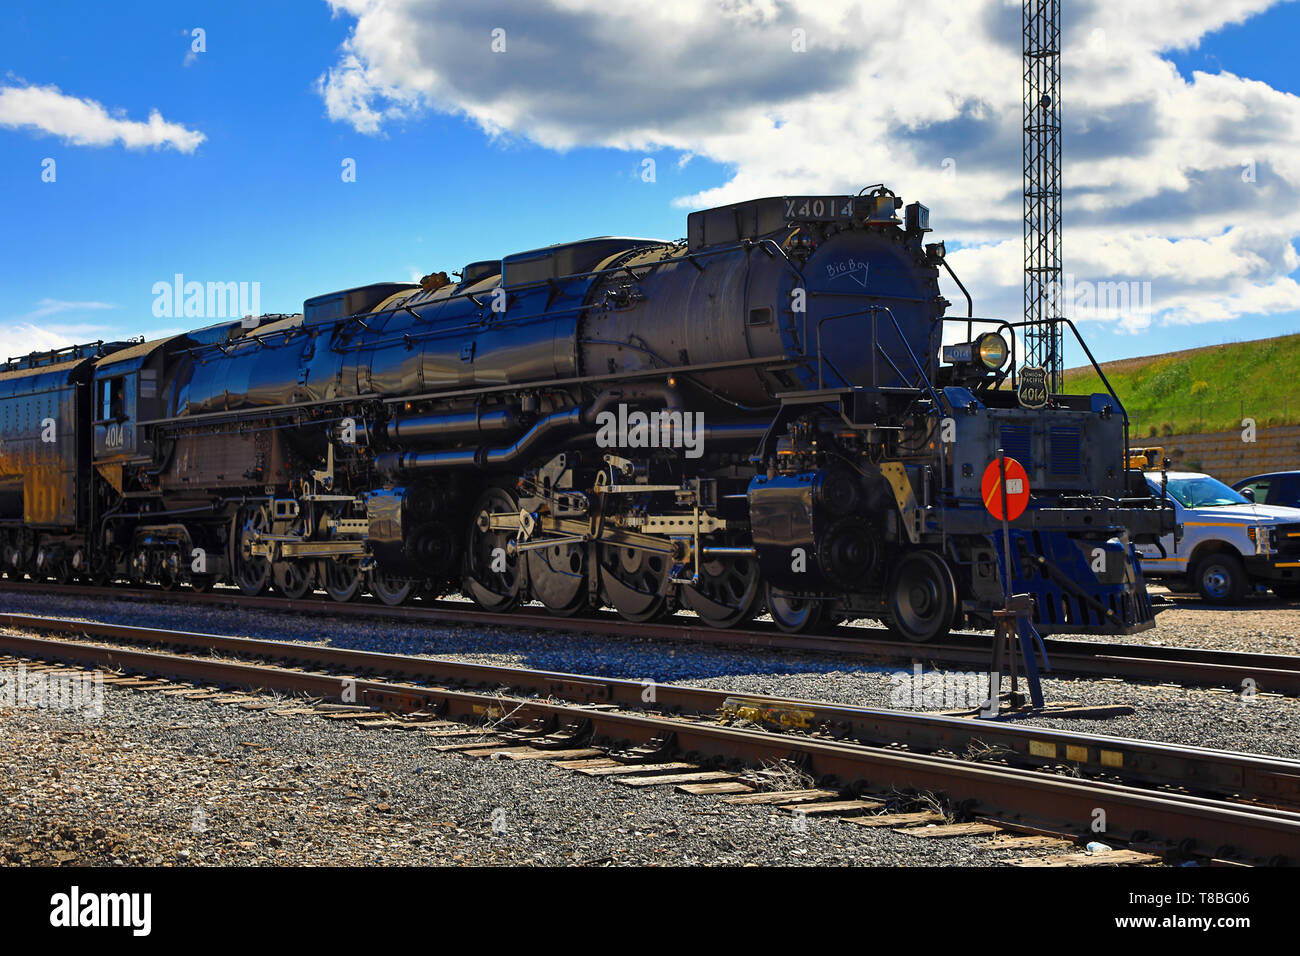 This is a shot of the Union Pacific steam locomotive known as 'Big Boy 4014' as it sits on display near Union Station in Ogden, Utah, USA. Stock Photo